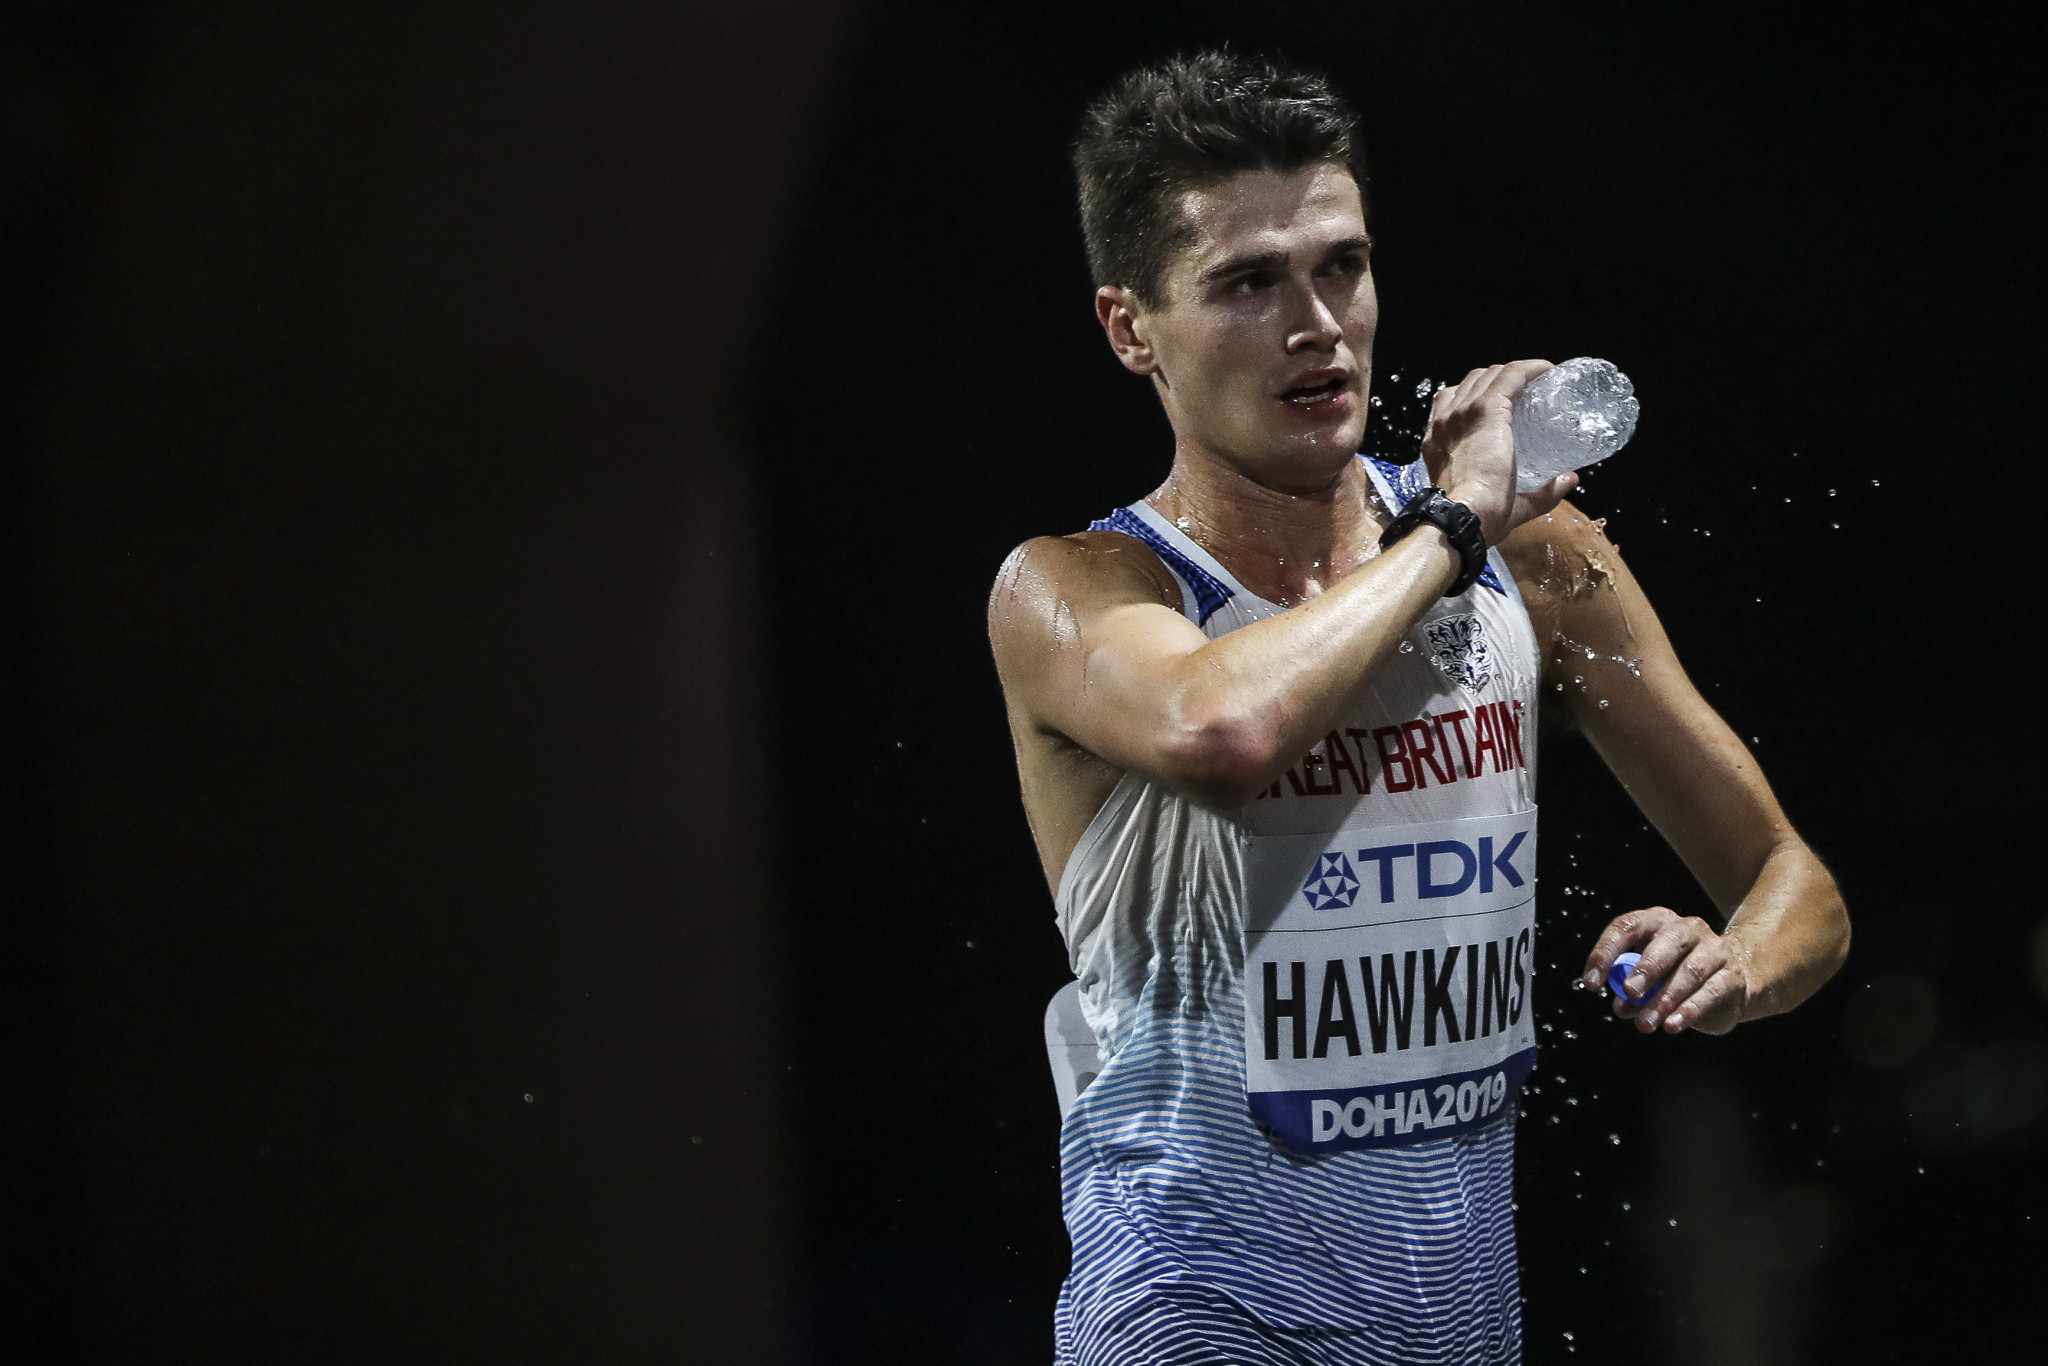 Britain has pre-selected Callum Hawkins for the Olympic marathon after he finished fourth at this year's IAAF World Championships in Doha ©Getty Images